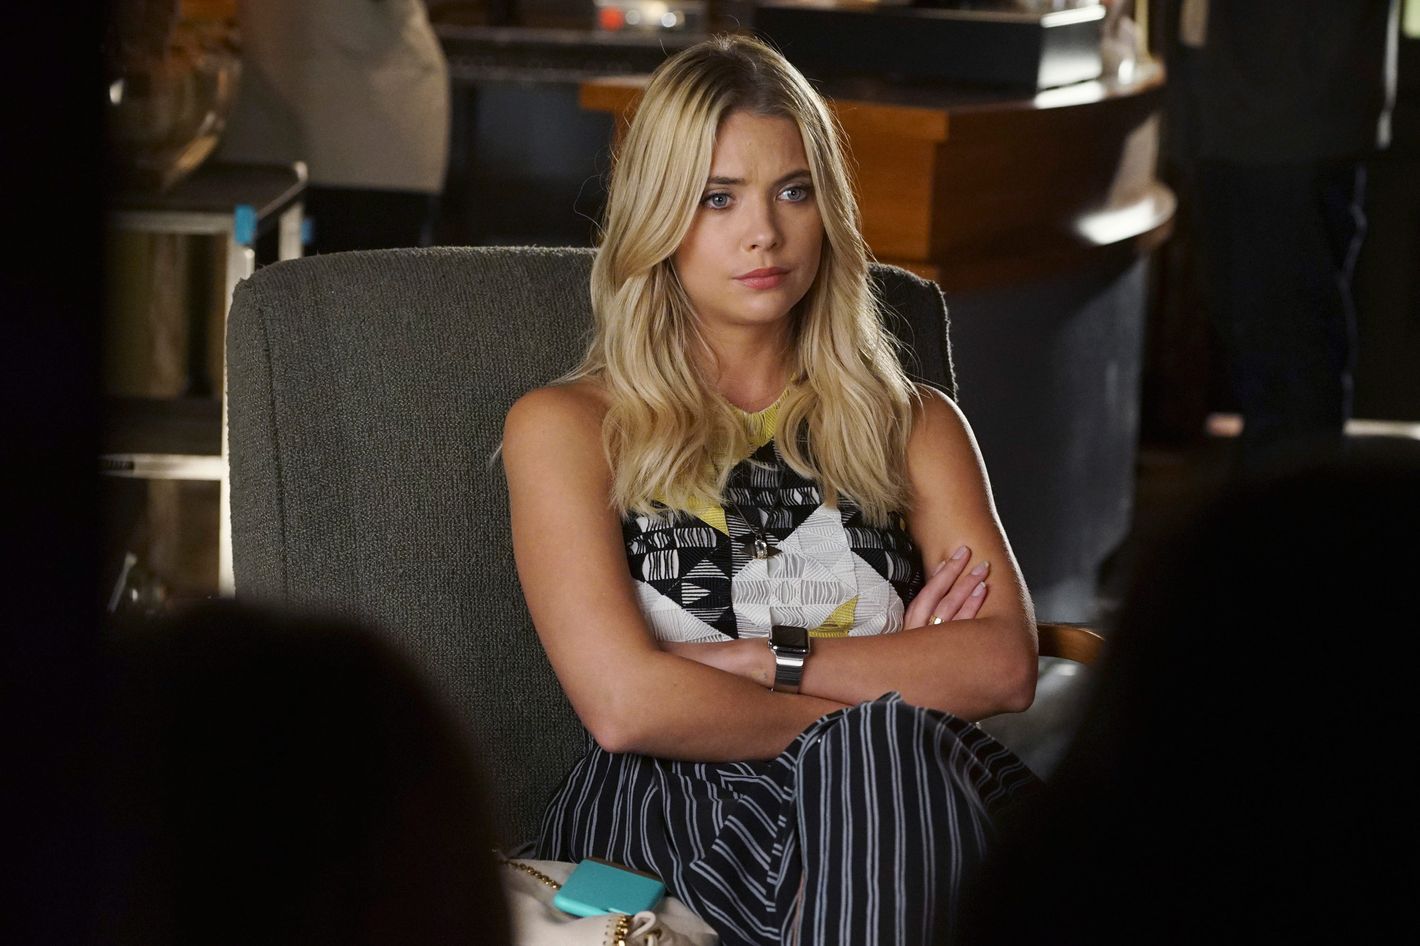 Why I'm breaking up with 'Pretty Little Liars